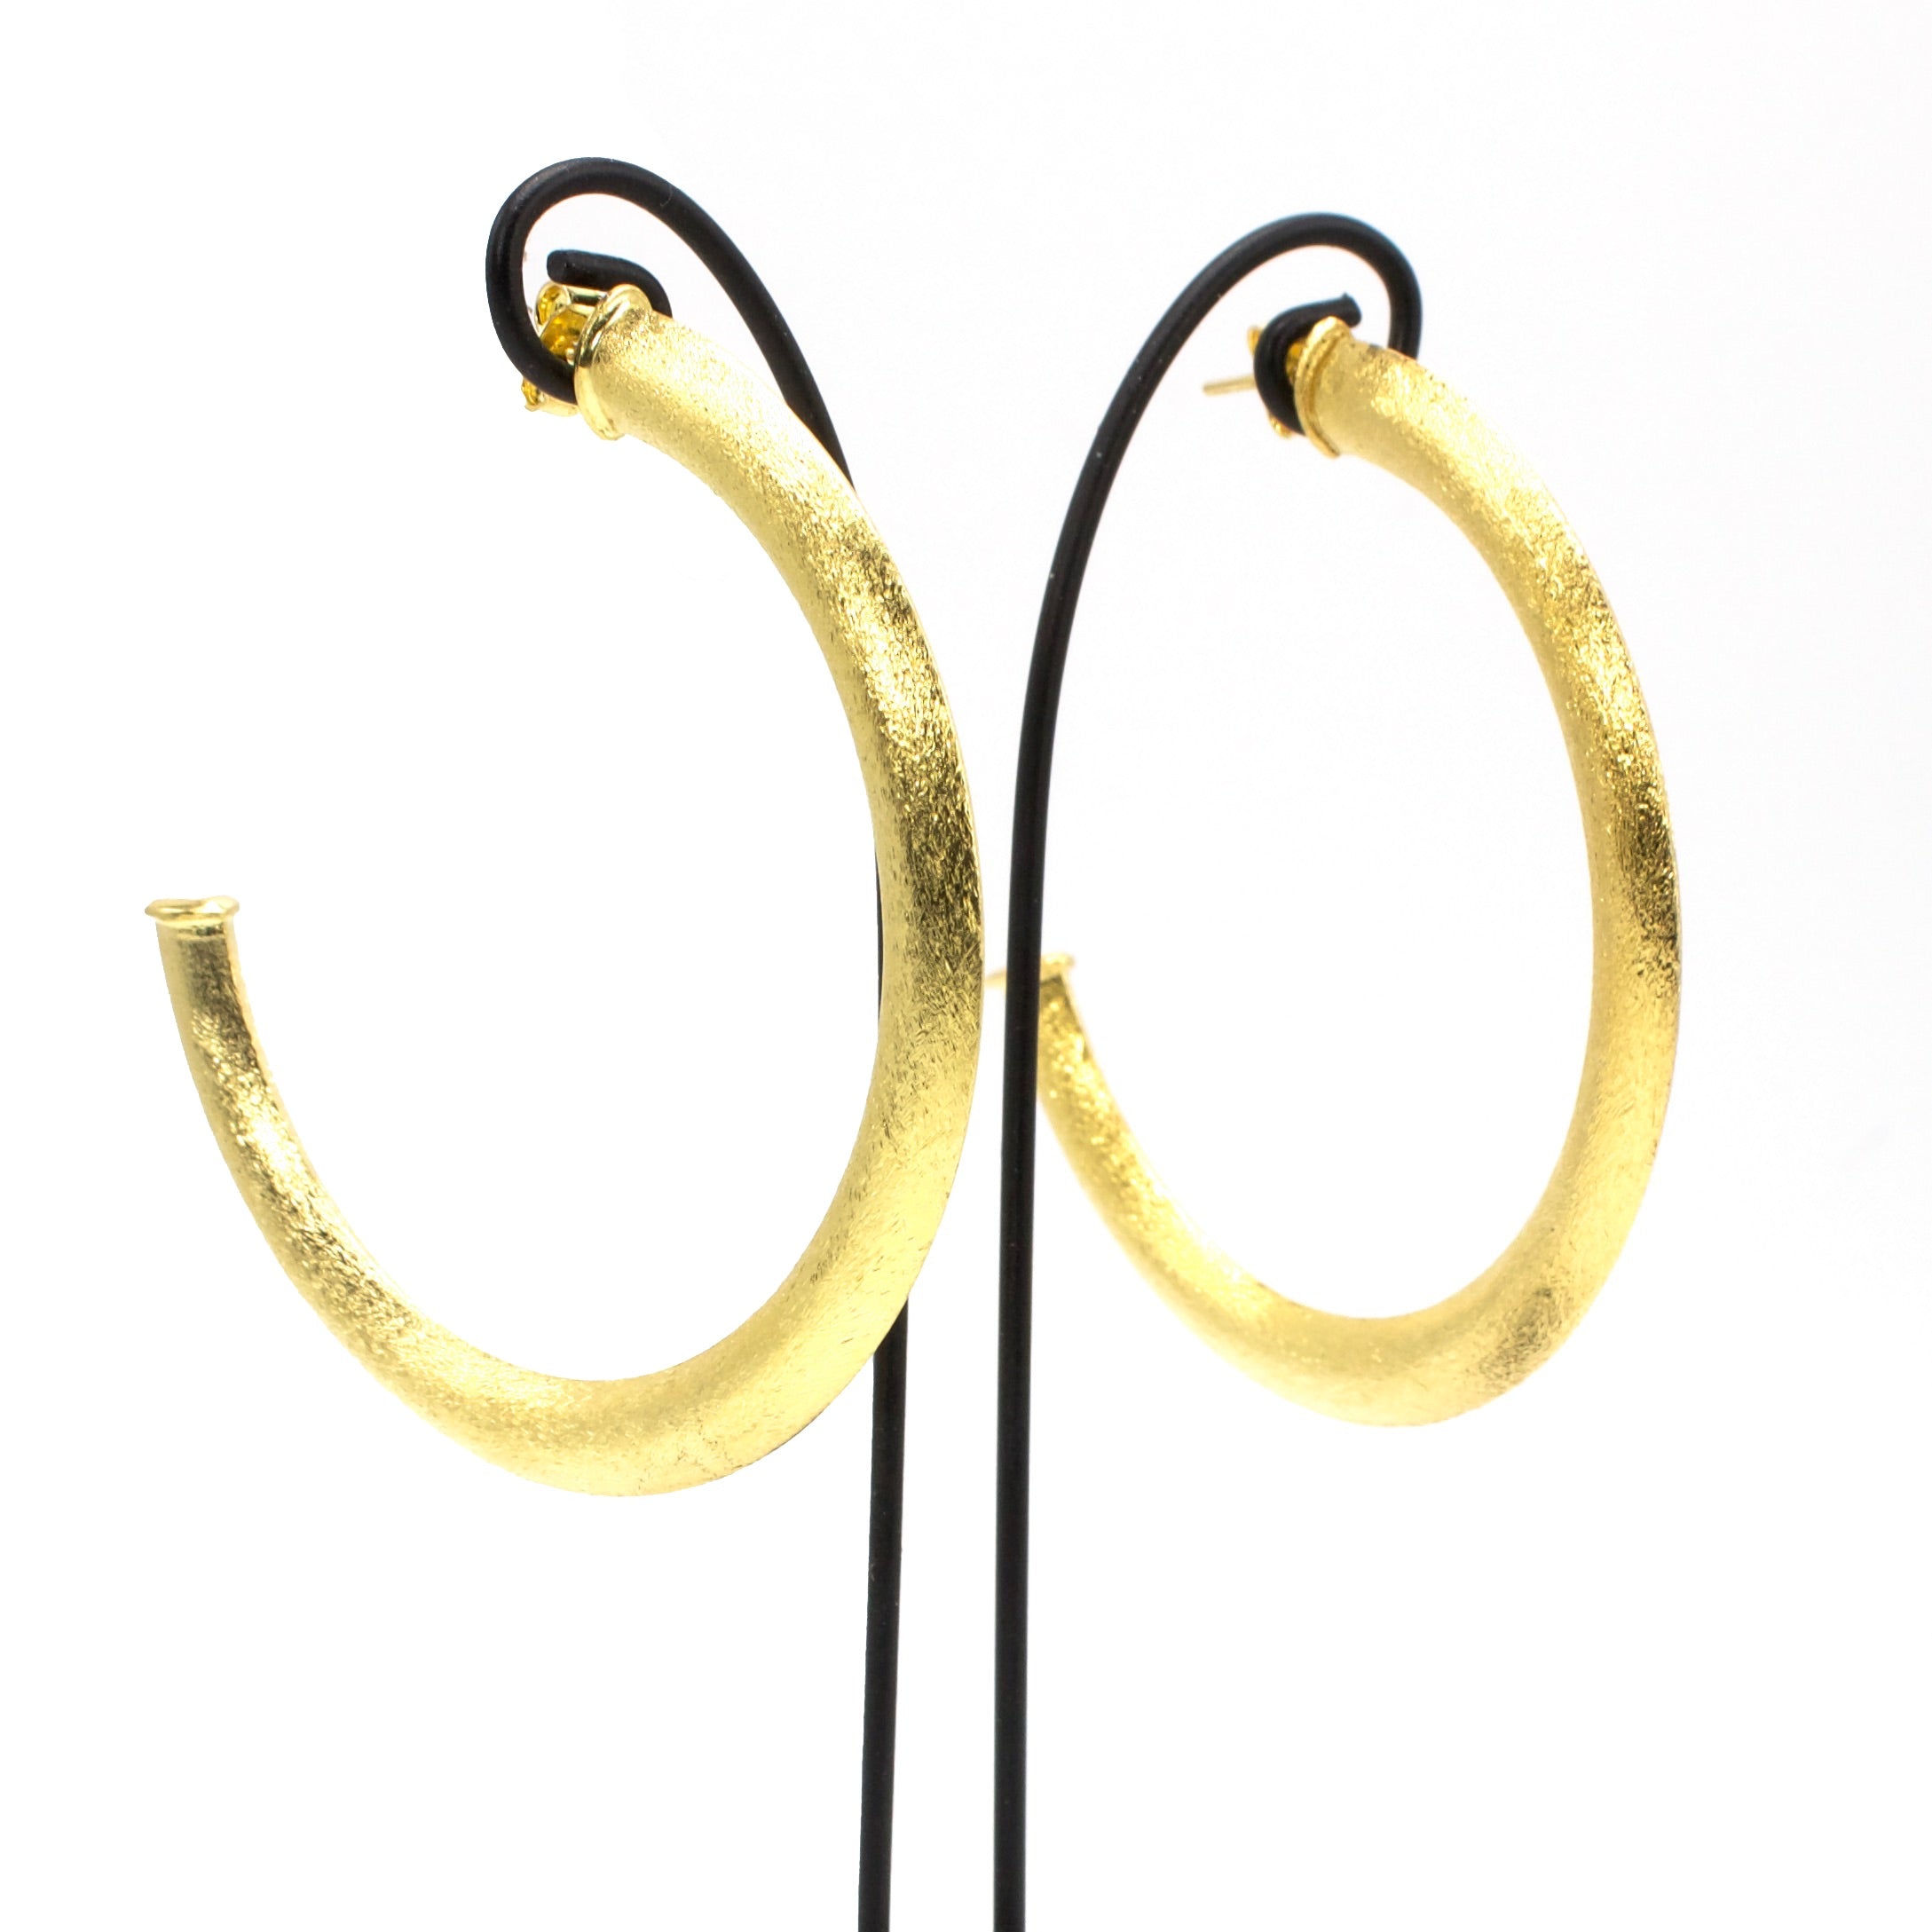 Large 18K Gold Plated Open Hoop Earrings with Brushed Finish